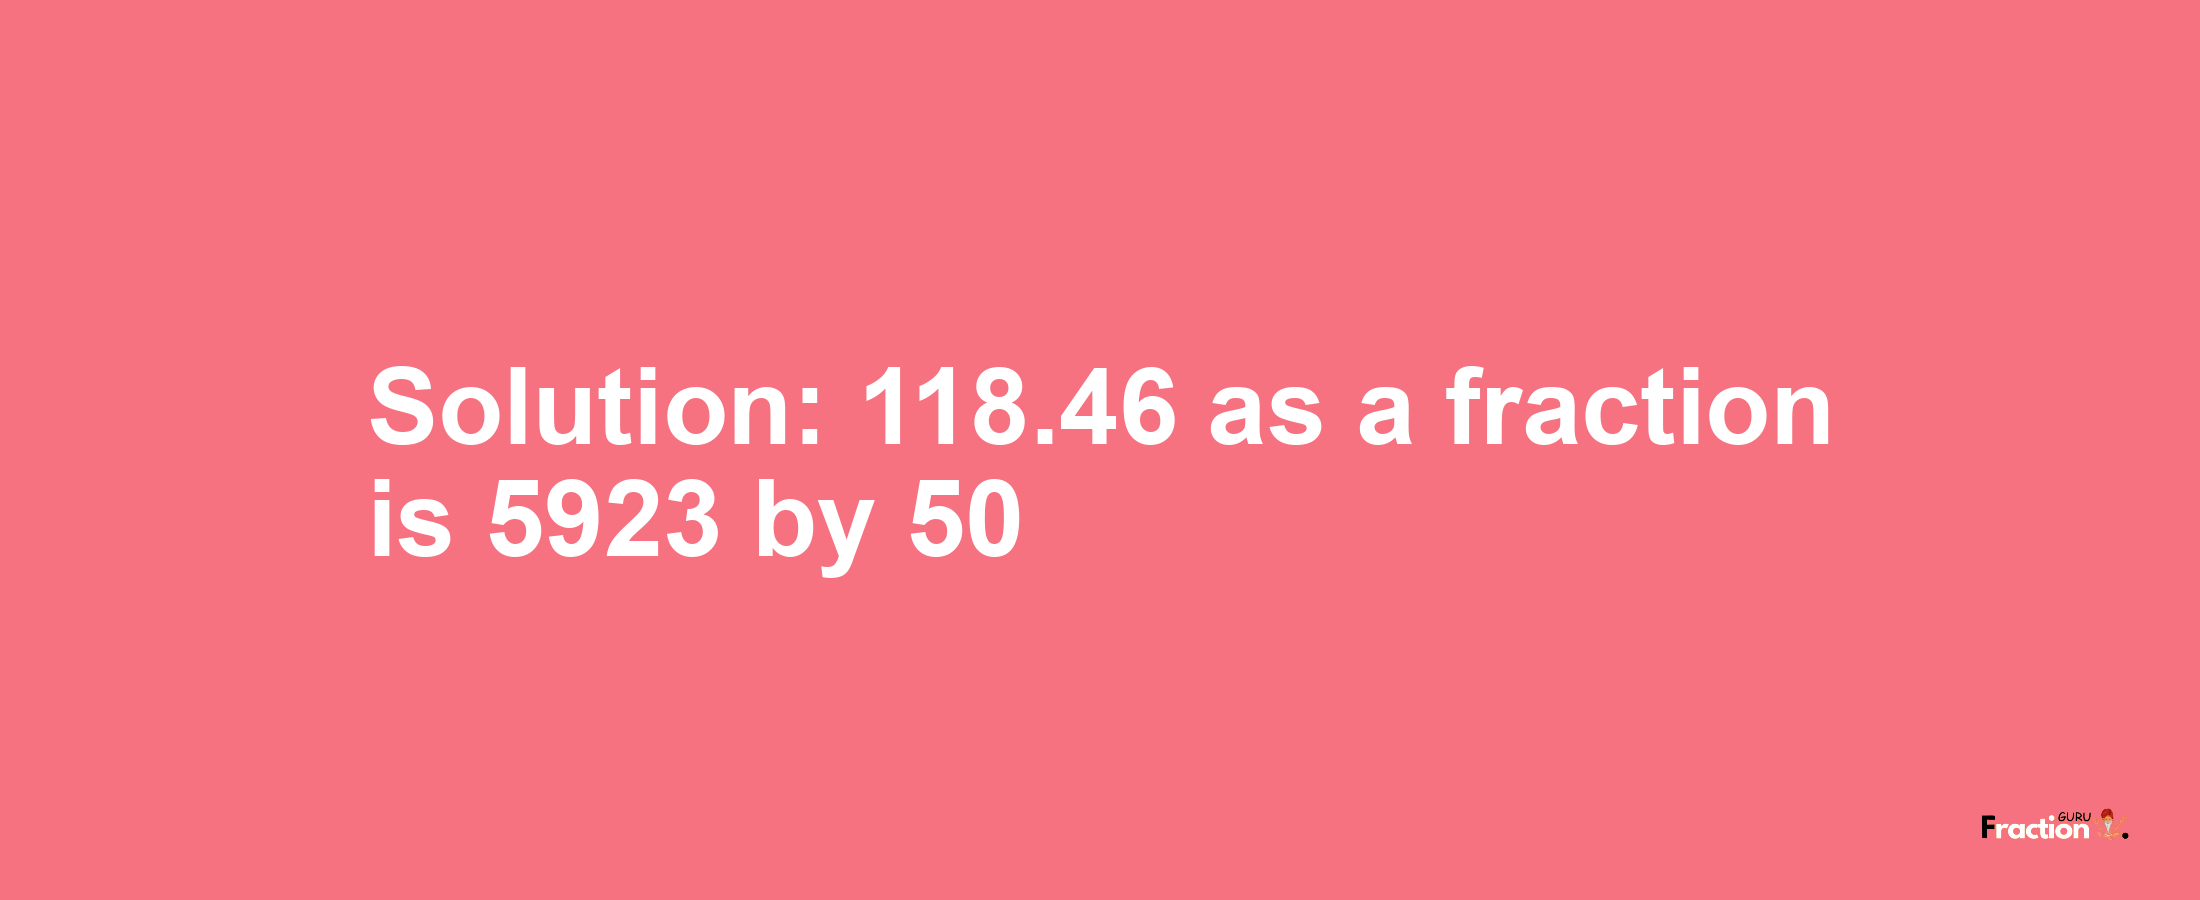 Solution:118.46 as a fraction is 5923/50